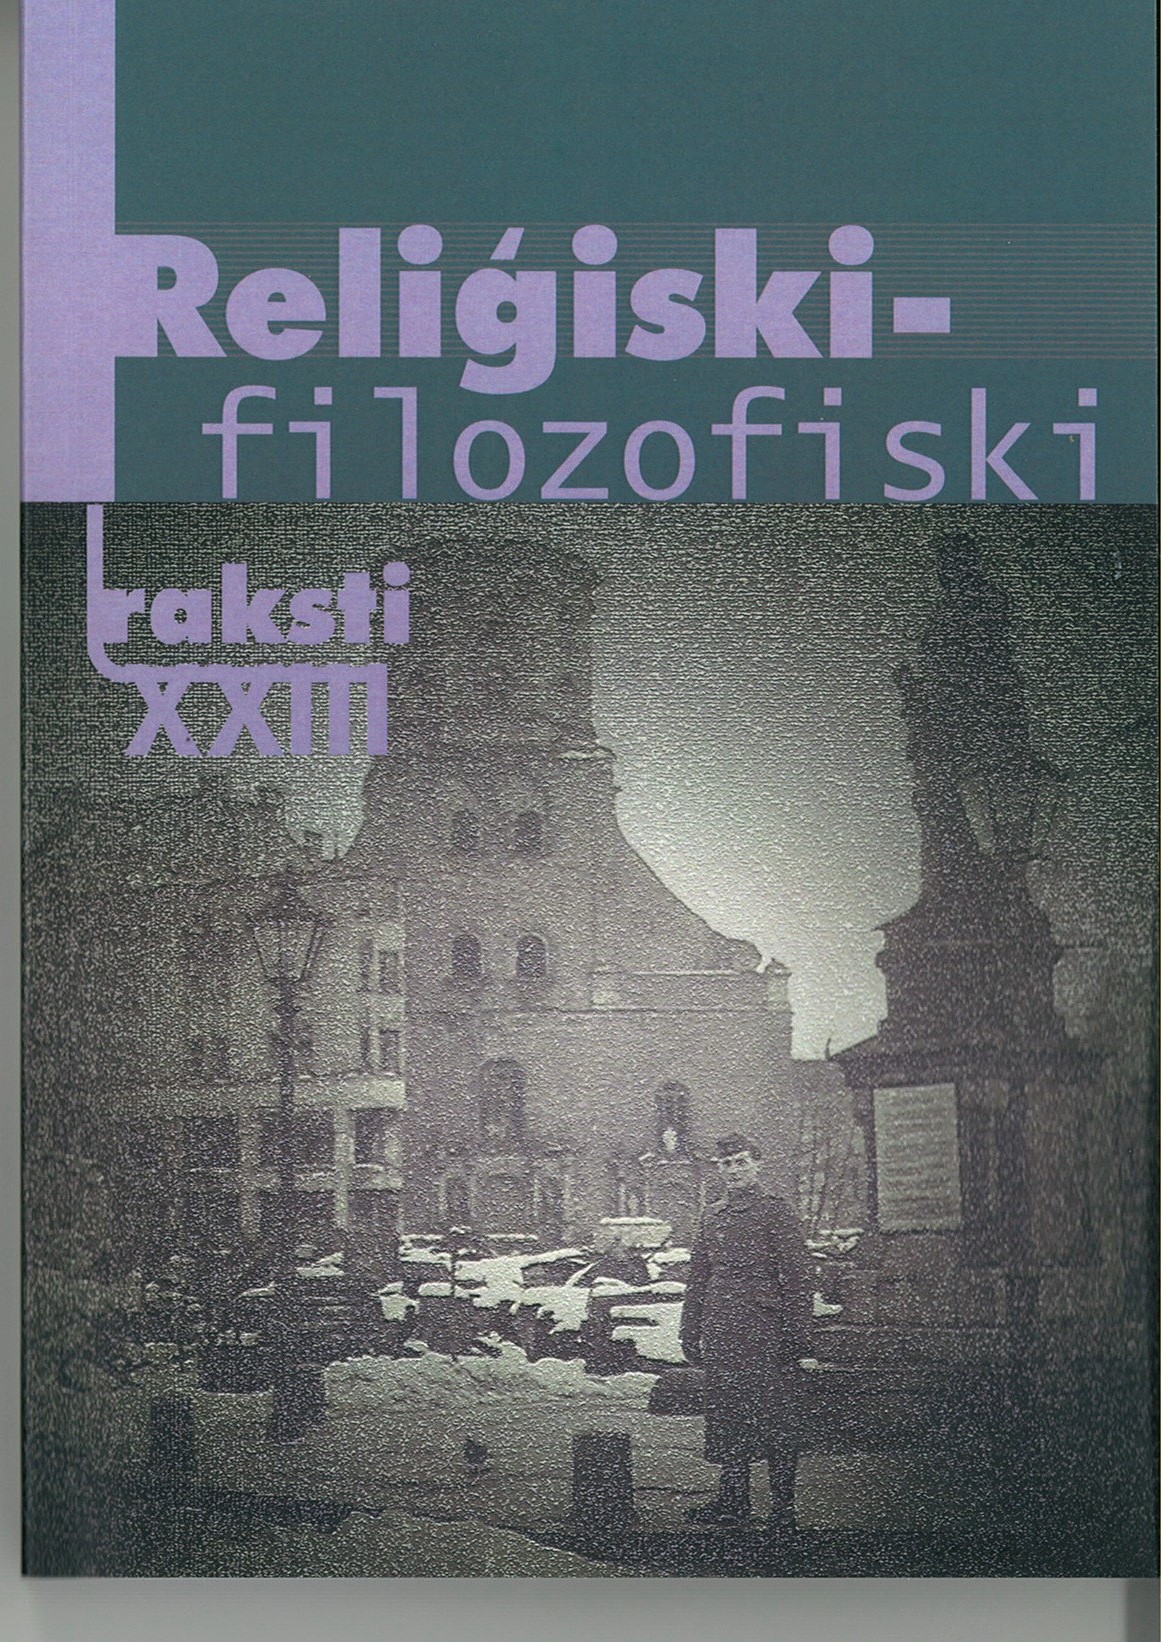 The Religious Studies on the Eve of Totalitarianism.
The Issue of Reformation Cover Image